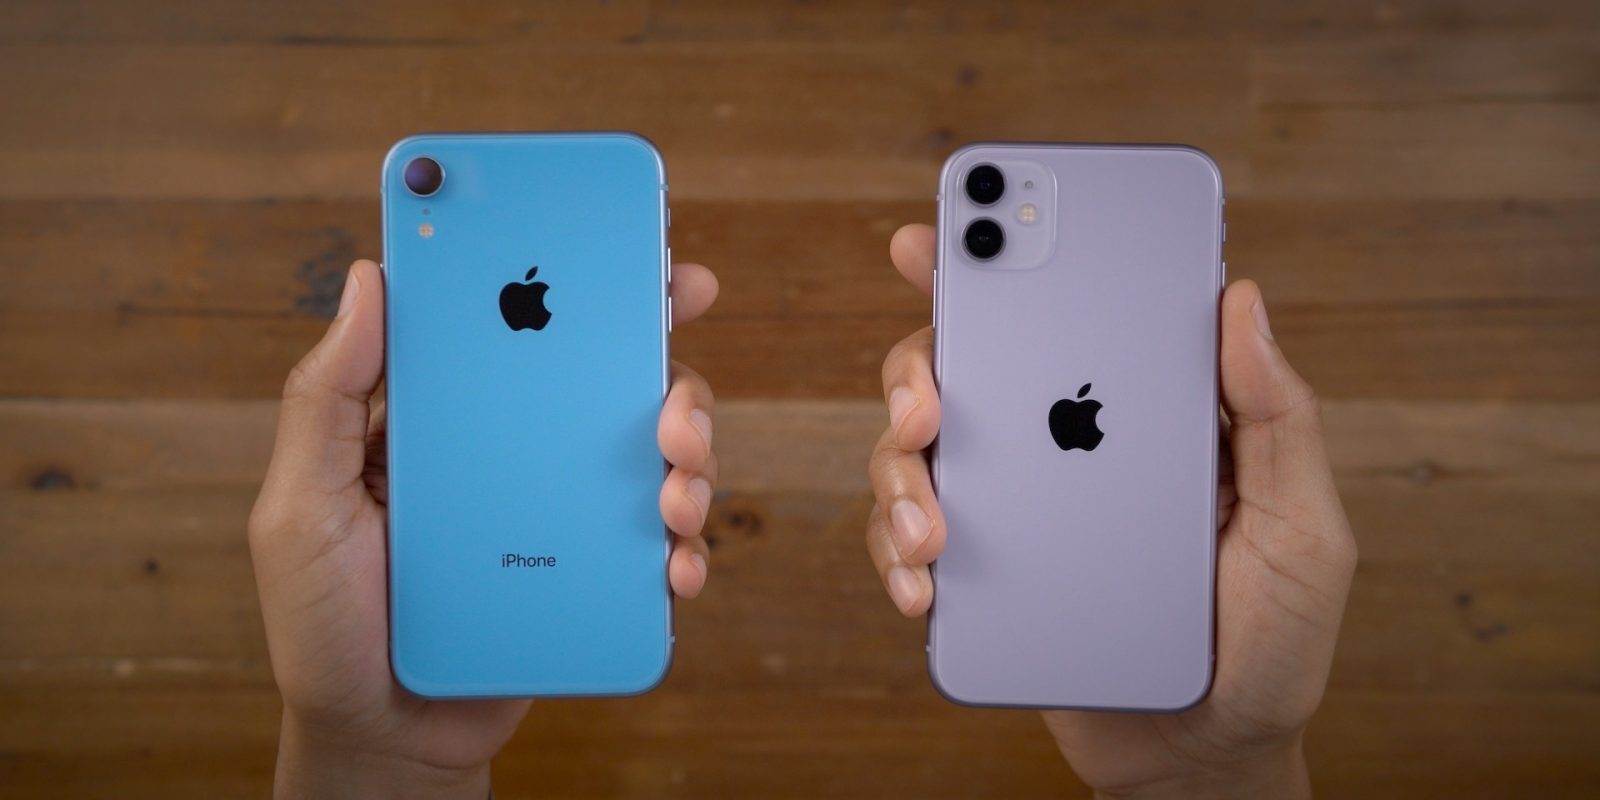 iphone 11 and Iphone XR